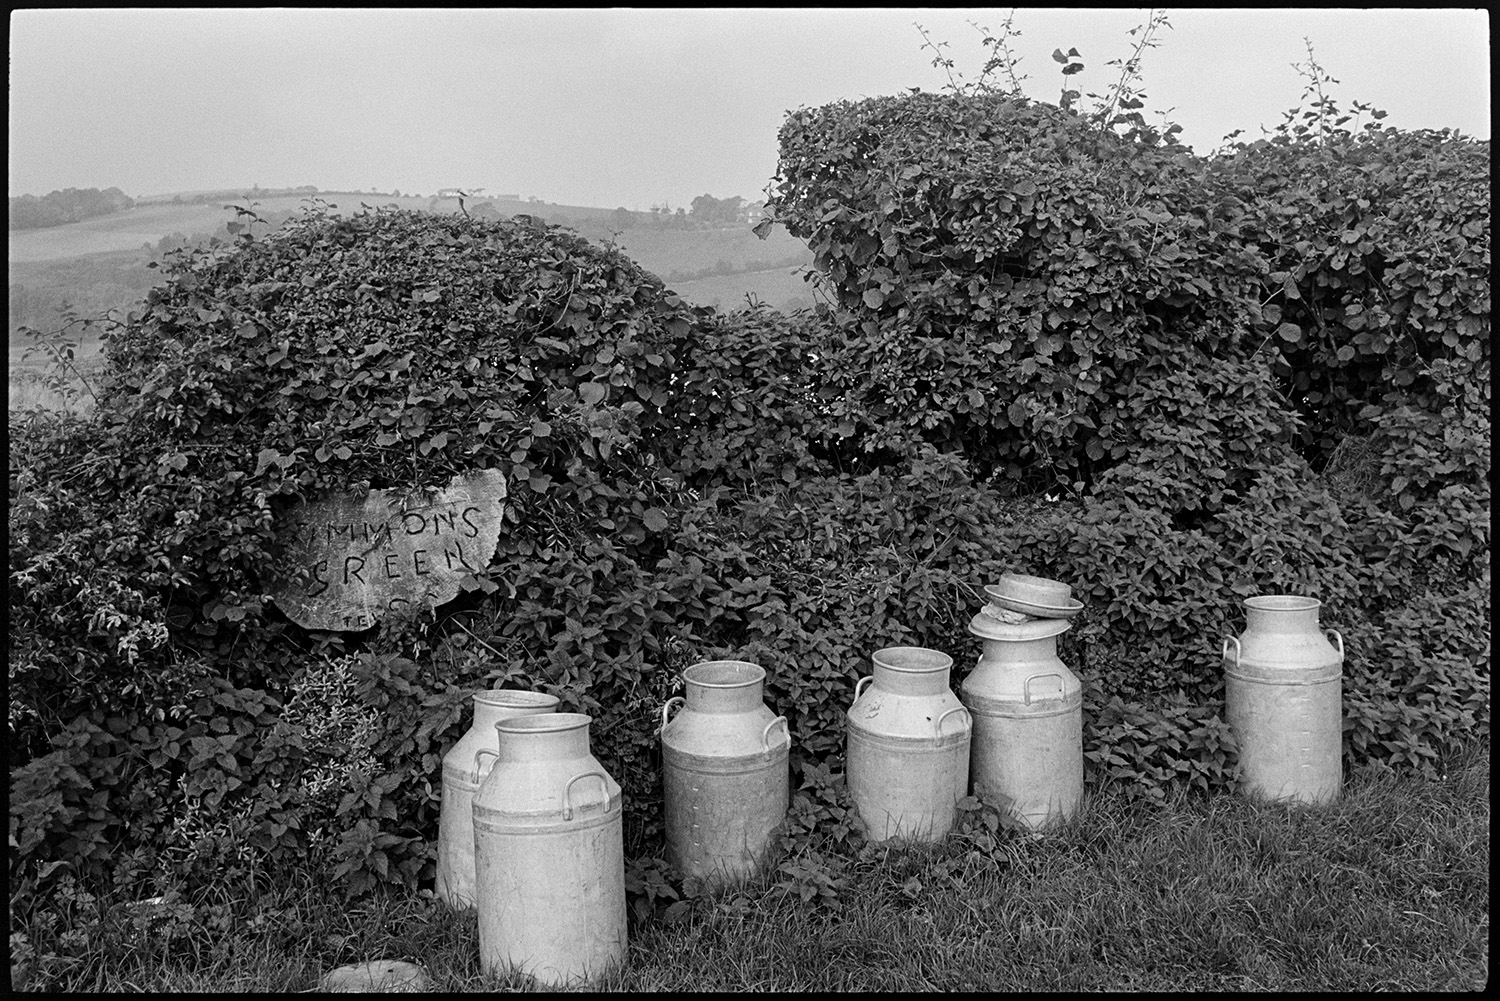 Milk churns against overgrown hedge. 
[Six milk churns stood by an overgrown hedge, possibly at Mariansleigh. A partially obscured wooden sign in the hedge reads 'Simmons Green'.]